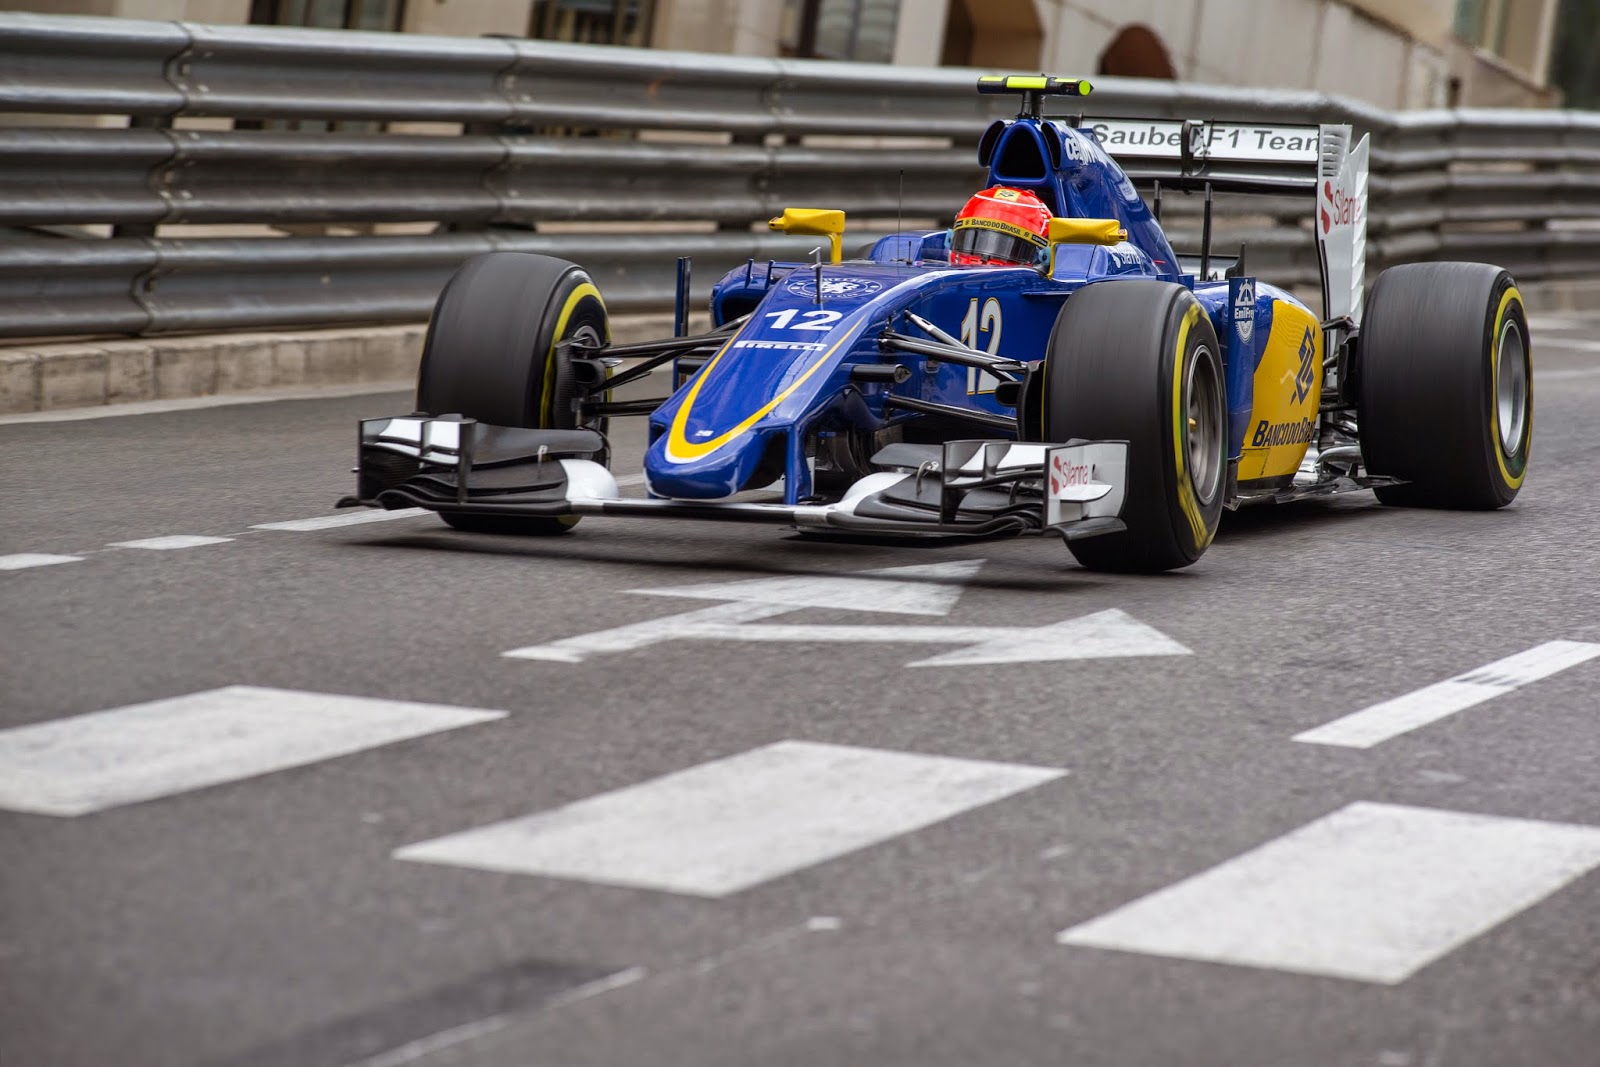 Paddock Eye: Disappointing qualifying for the Sauber F1 Team in Monaco